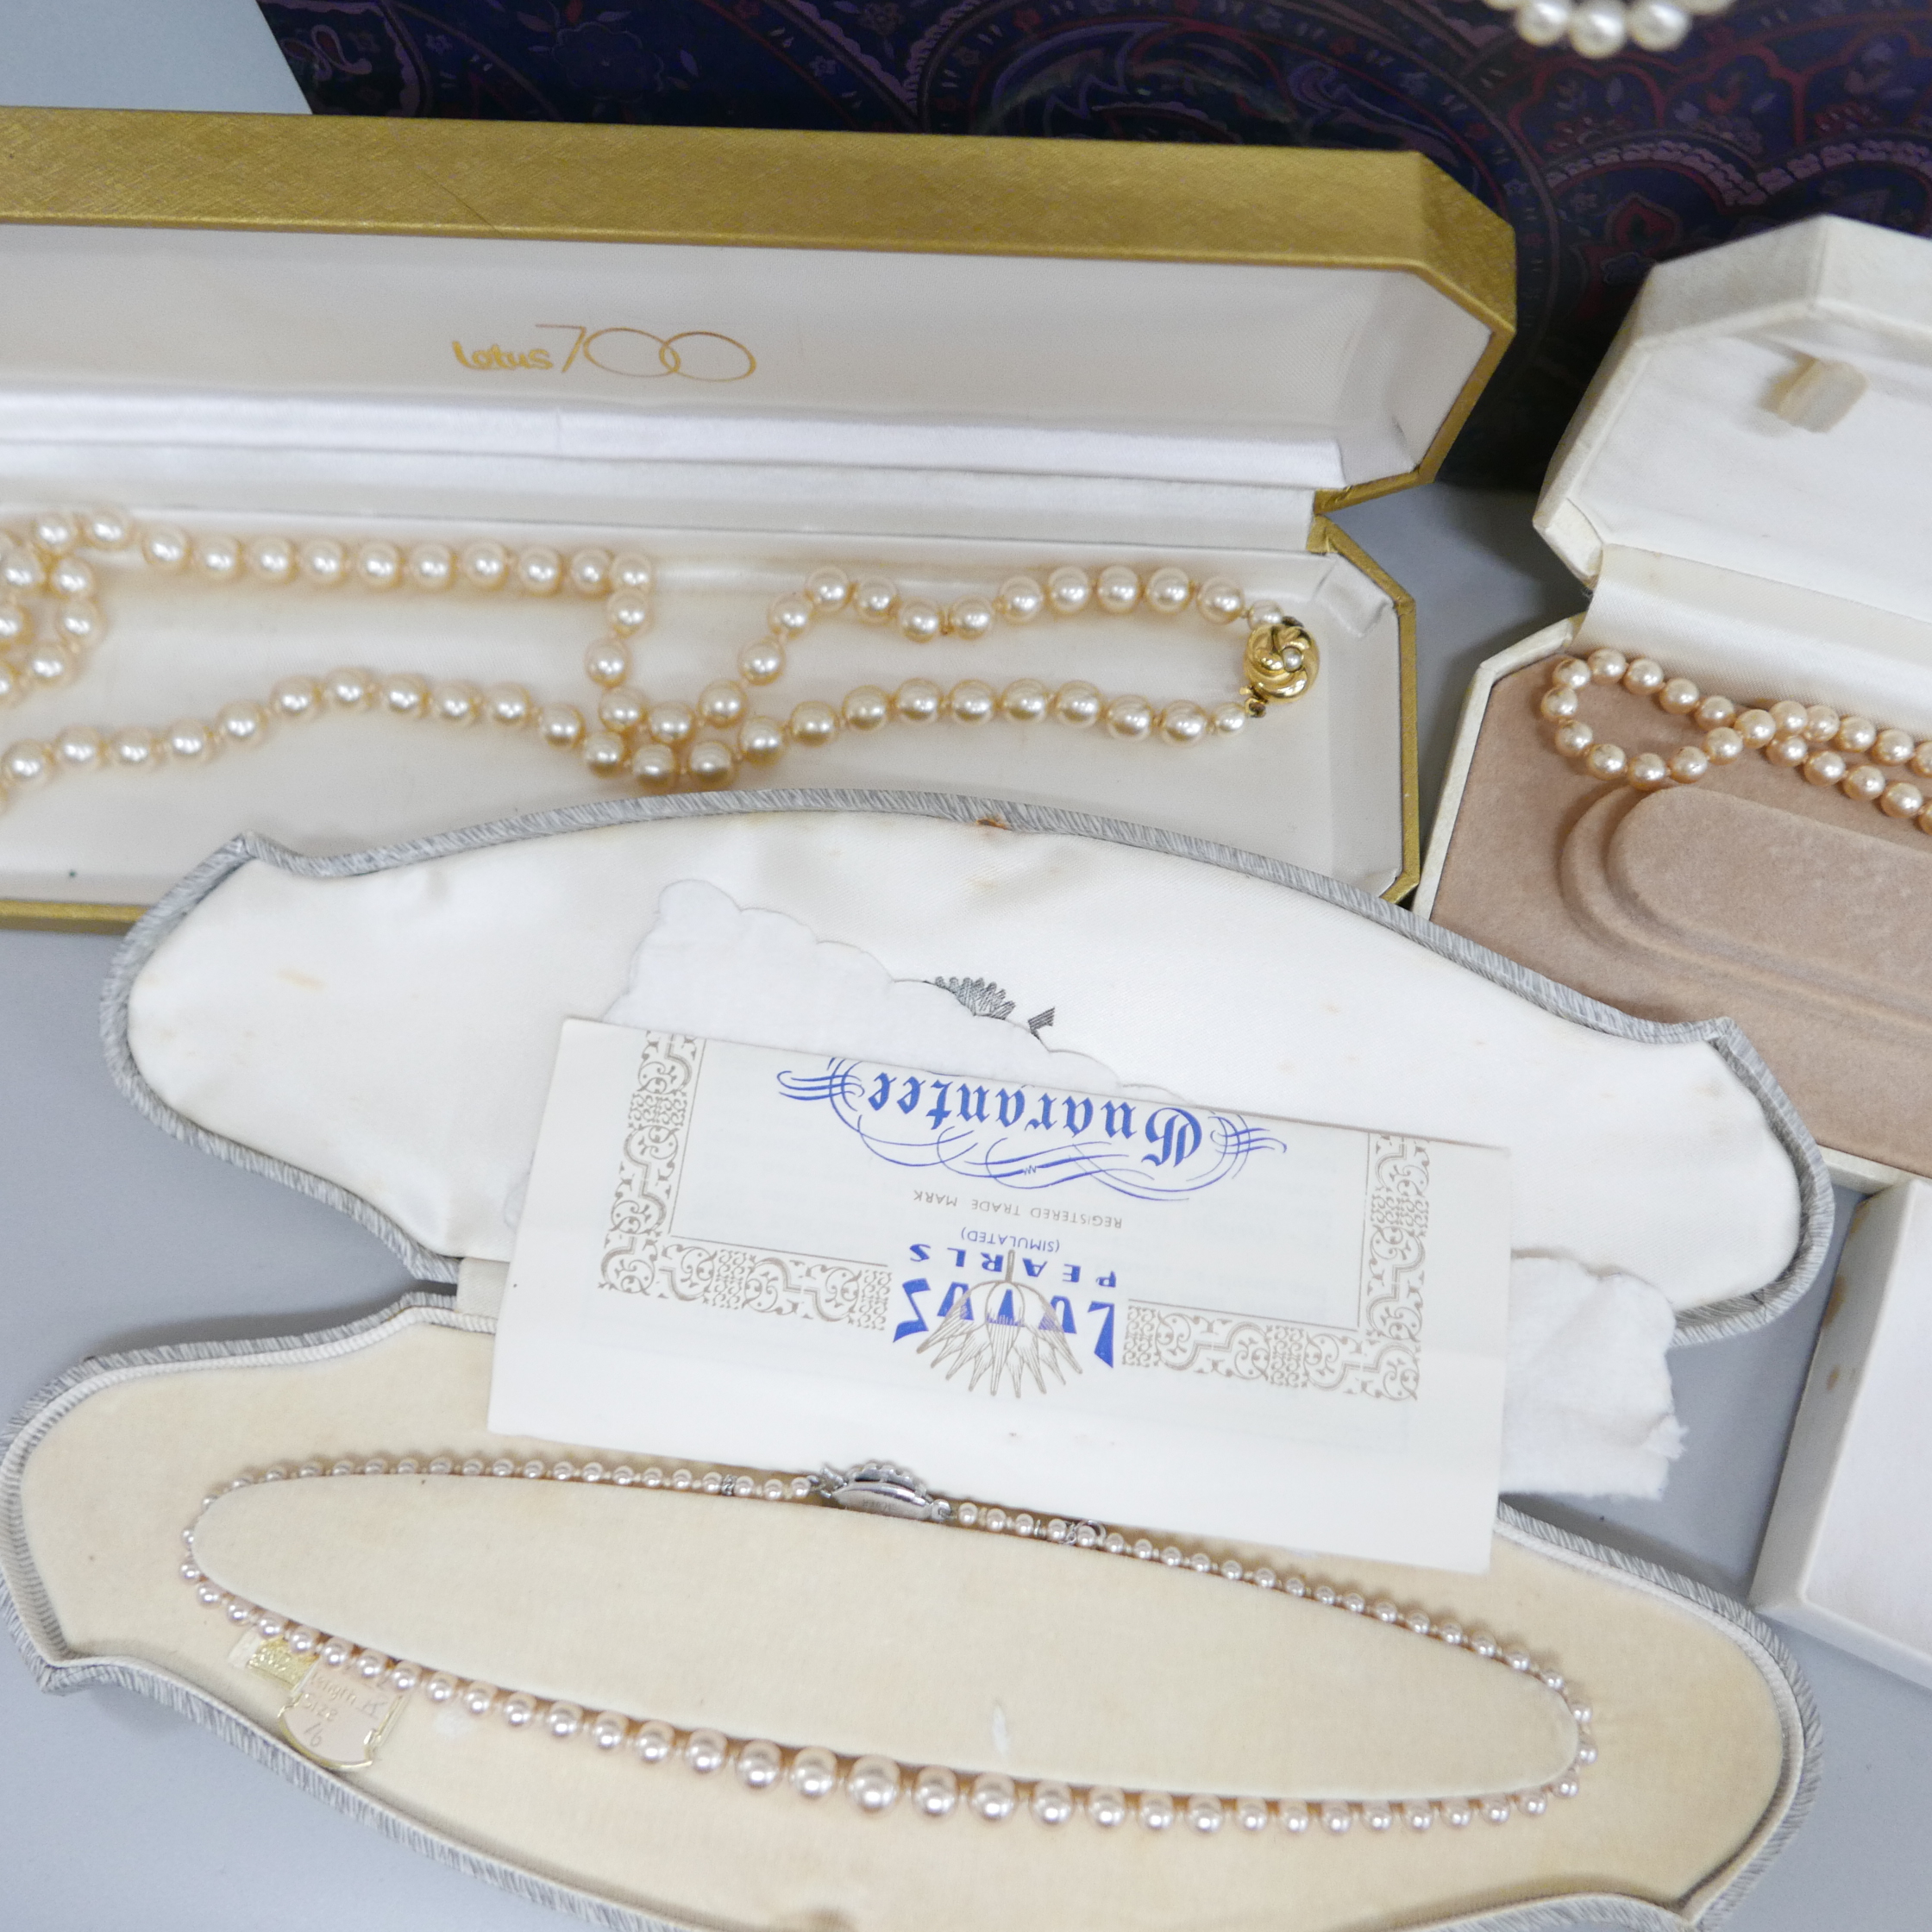 Boxed pearls including Lotus and silver mounted - Image 5 of 6